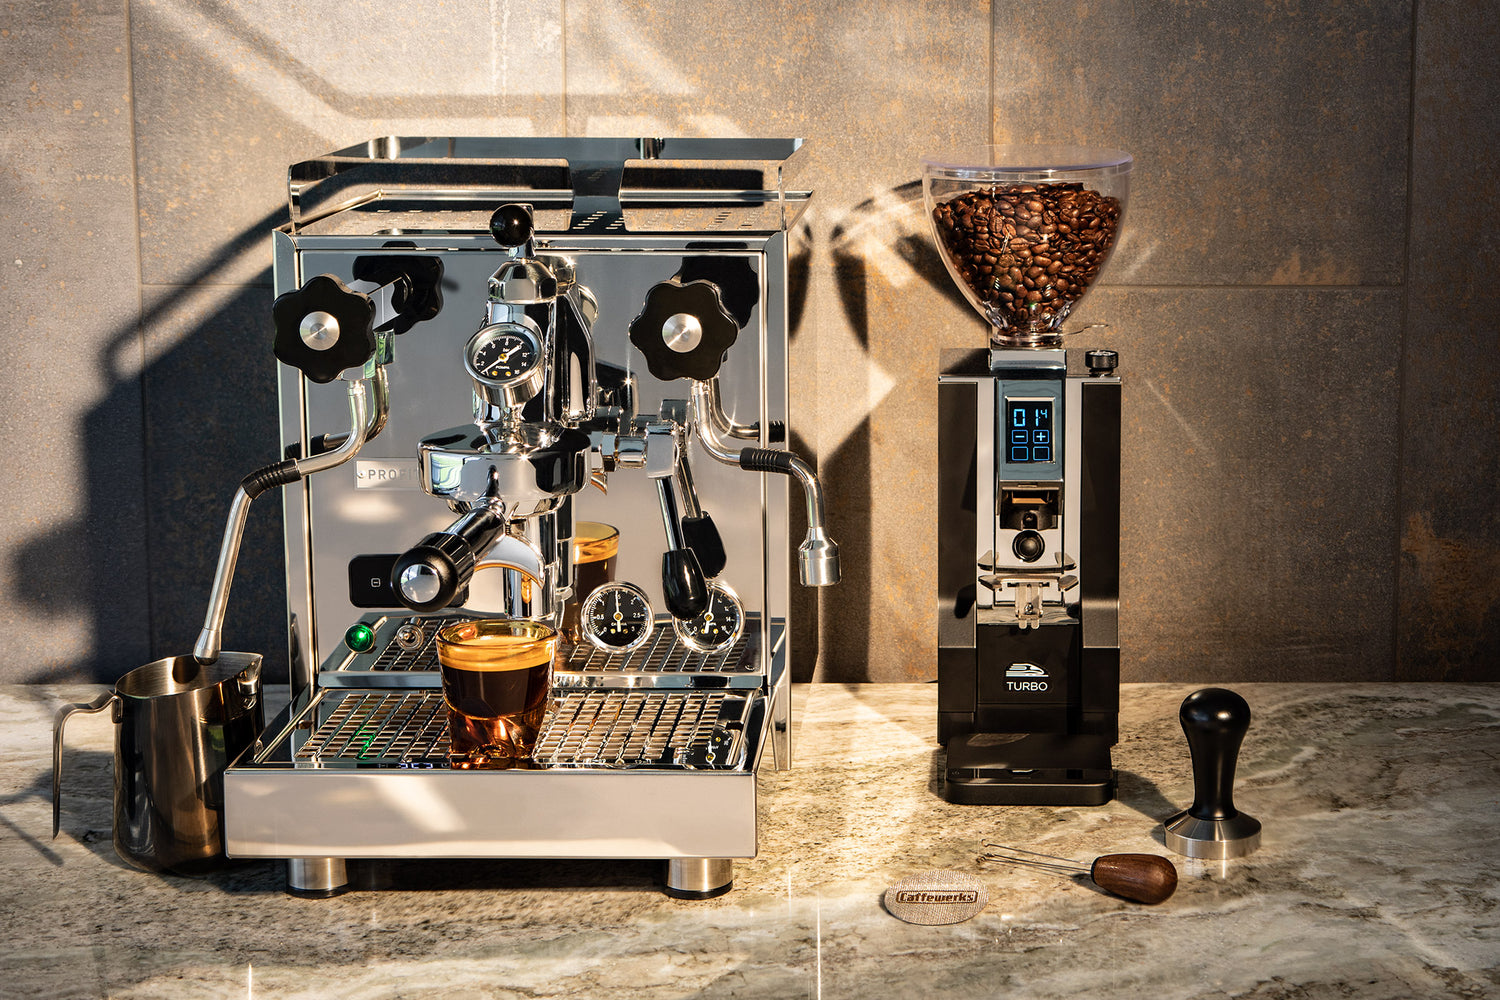 How to Build Your Home Espresso Bar From Scratch